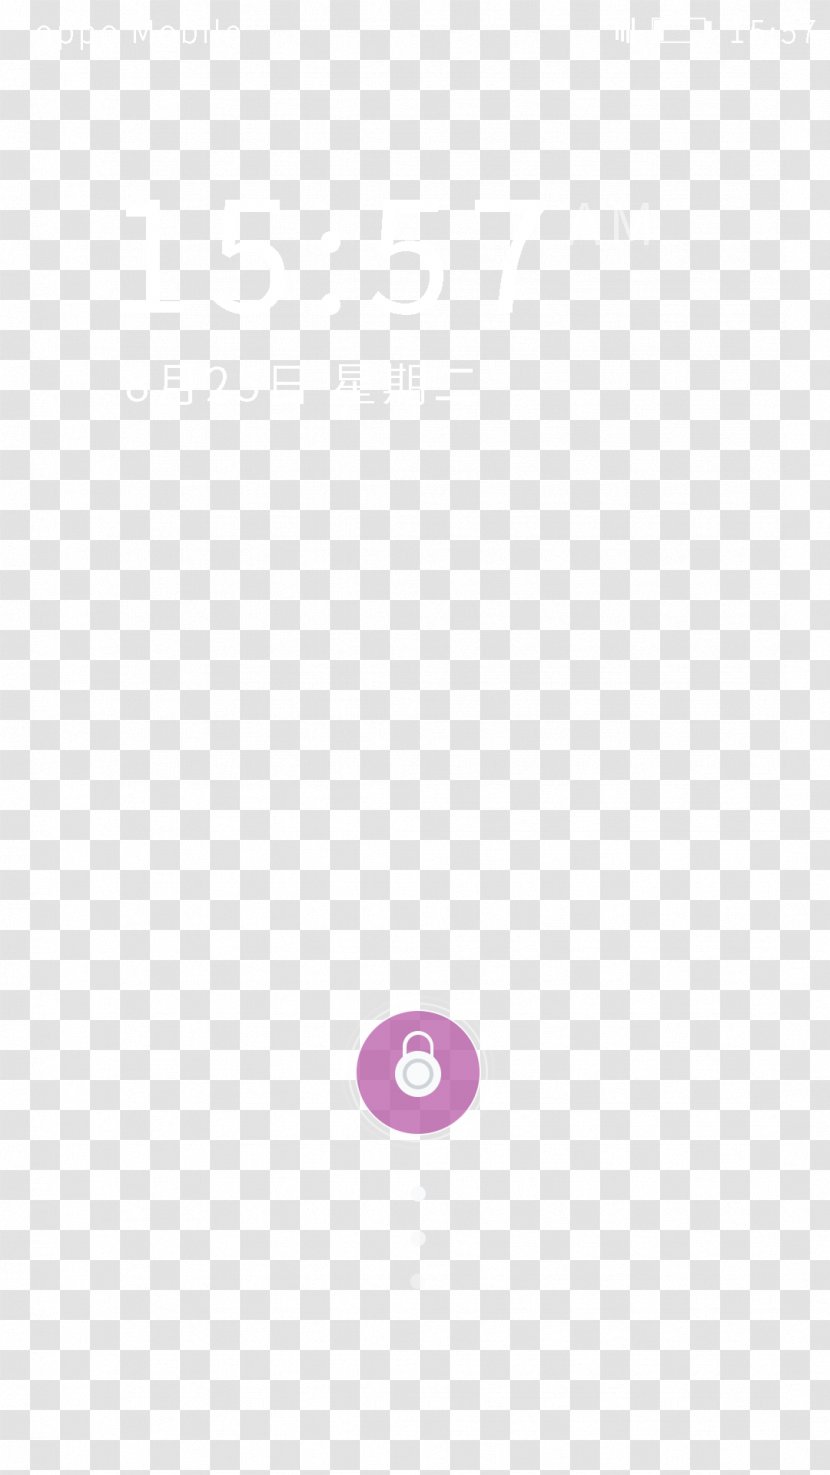 Textile Area Pattern - Phone Lock Screen Interface Transparent PNG